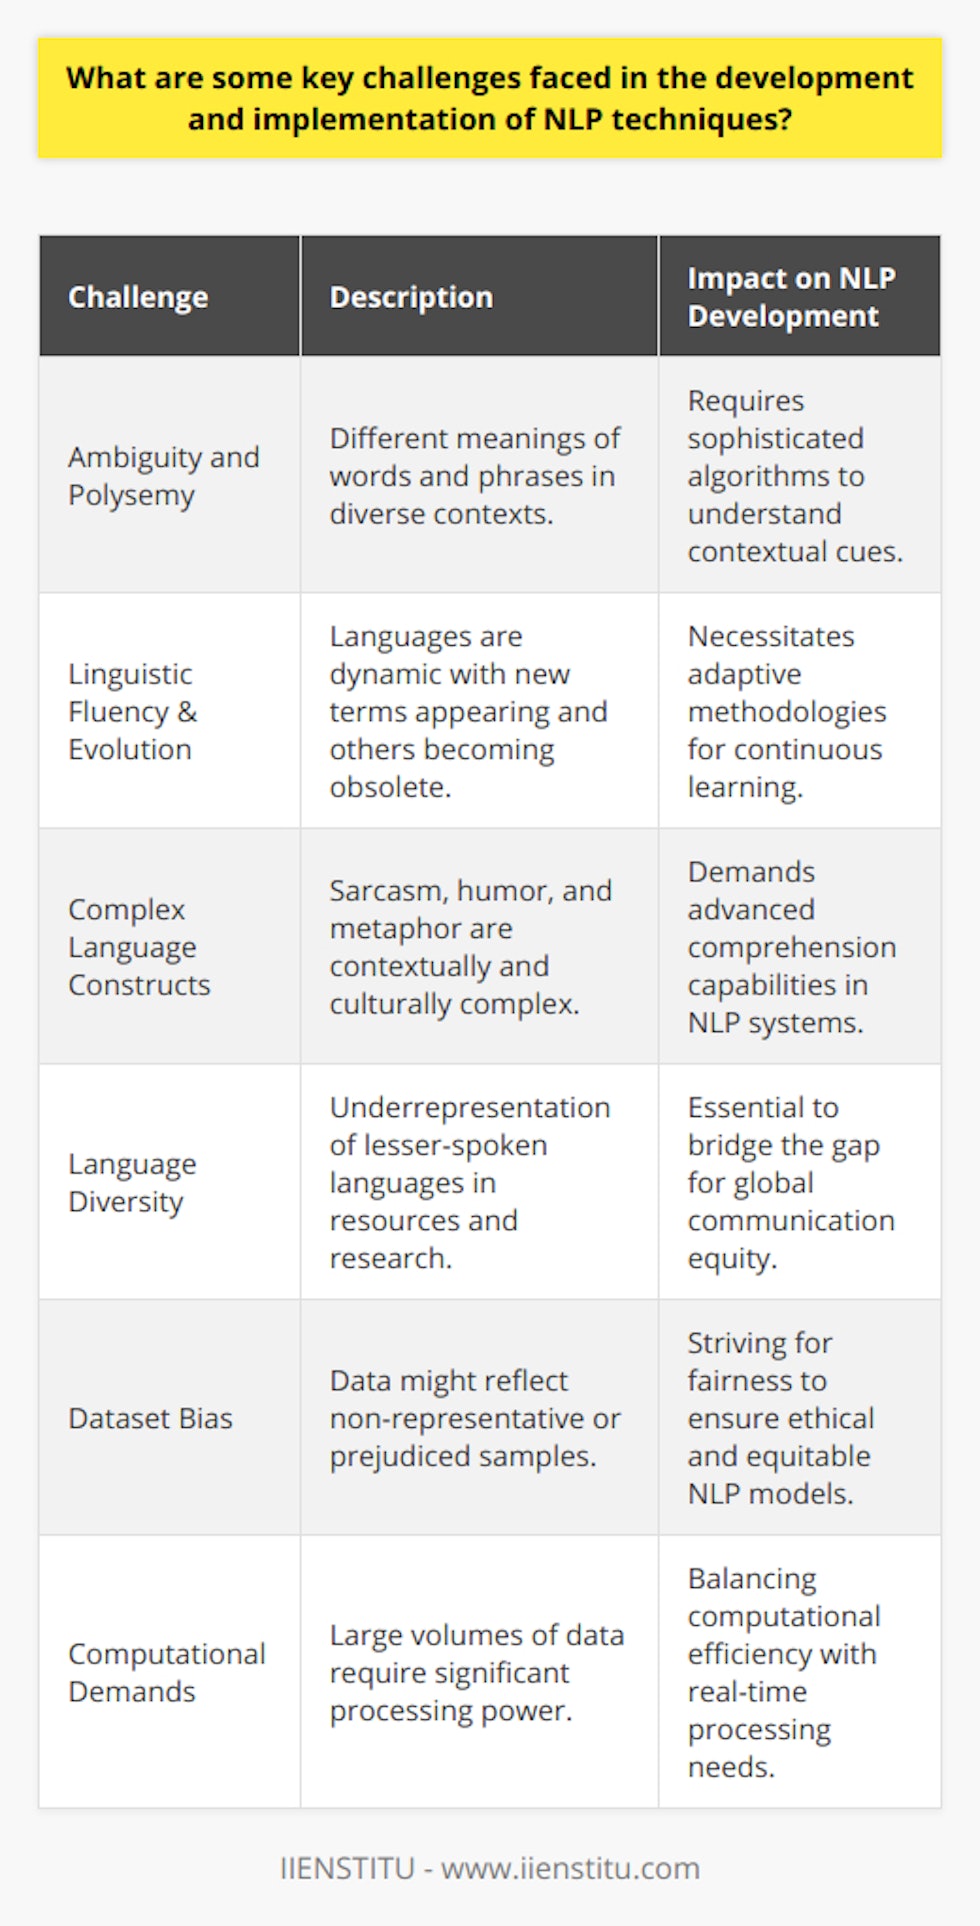 The development and implementation of natural language processing (NLP) techniques confront a myriad of challenges that must be delicately managed to progress this intricate field of artificial intelligence. Here, we examine several key challenges facing NLP professionals and researchers.Ambiguity and polysemy present formidable hurdles for NLP models. Words or phrases in different contexts may have various meanings, necessitating sophisticated algorithms capable of discerning contextual signals to interpret language precisely.Achieving linguistic fluency across NLP systems remains an elusive goal partly due to the dynamic nature of language itself. New words, idioms, and usages emerge, while other terms fall into obsolescence. Keeping pace with these changes requires adaptive NLP methodologies capable of learning from ongoing language evolution.A closely related challenge is the intricacy of natural language constructs such as sarcasm, humor, and metaphor. These elements of communication are deeply rooted in cultural and situational contexts, often defying straightforward interpretation and requiring advanced comprehension capabilities within NLP systems.Language diversity further complicates NLP endeavors. While resources and research predominantly cater to dominant languages, numerous lesser-spoken languages lack the data and tools necessary for NLP development. Bridging this gap is essential for the advancement of global communication and information dissemination.Bias in datasets, resulting from non-representative or prejudiced sample sources, can inadvertently shape NLP outcomes. Striving for fairness and combating these biases is a vital ongoing effort in the NLP community to ensure ethical practices and equitable system behaviors.Finally, the computational demands for processing and analyzing large volumes of textual data for NLP tasks are considerable. Maintaining a balance between computational load and the performance of NLP models is crucial, especially given the imperative for real-time processing in certain applications.Addressing these challenges is not an easy task, but it remains a priority for those pioneering the future of NLP. With a focus on precision, adaptability, inclusivity, and ethical responsibility, the NLP landscape continues to evolve, striving to decipher and utilize human language in its myriad forms.